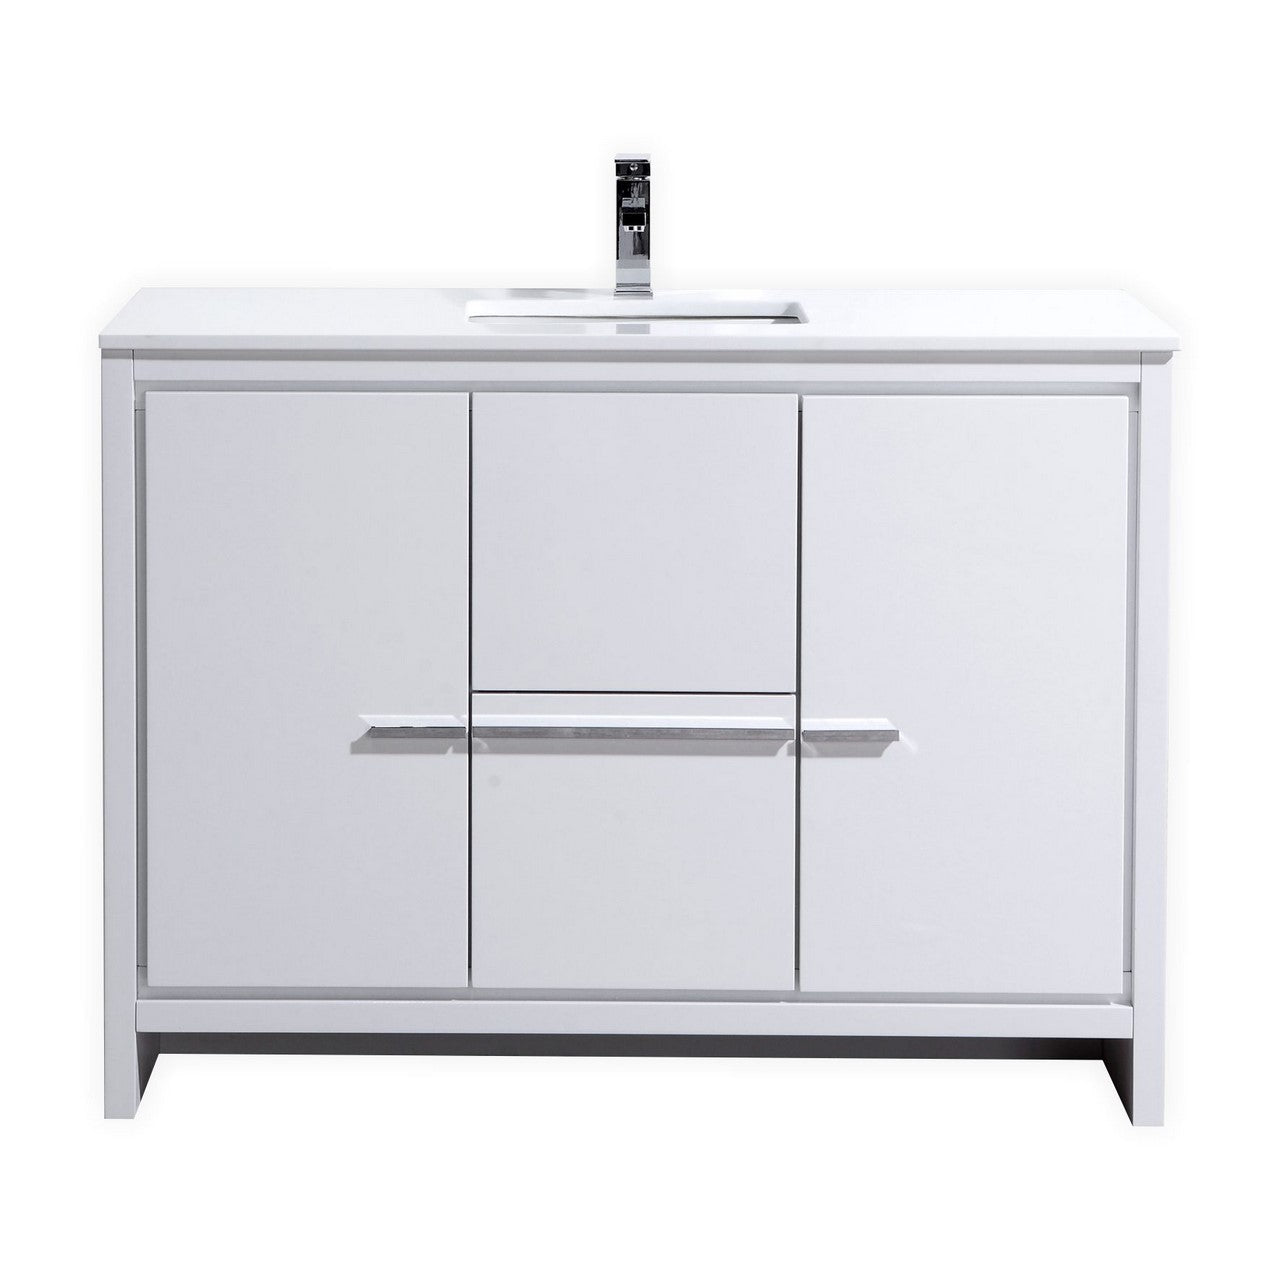 KUBEBATH Dolce AD648SGW 48" Single Bathroom Vanity in High Gloss White with White Quartz, Rectangle Sink, Front View